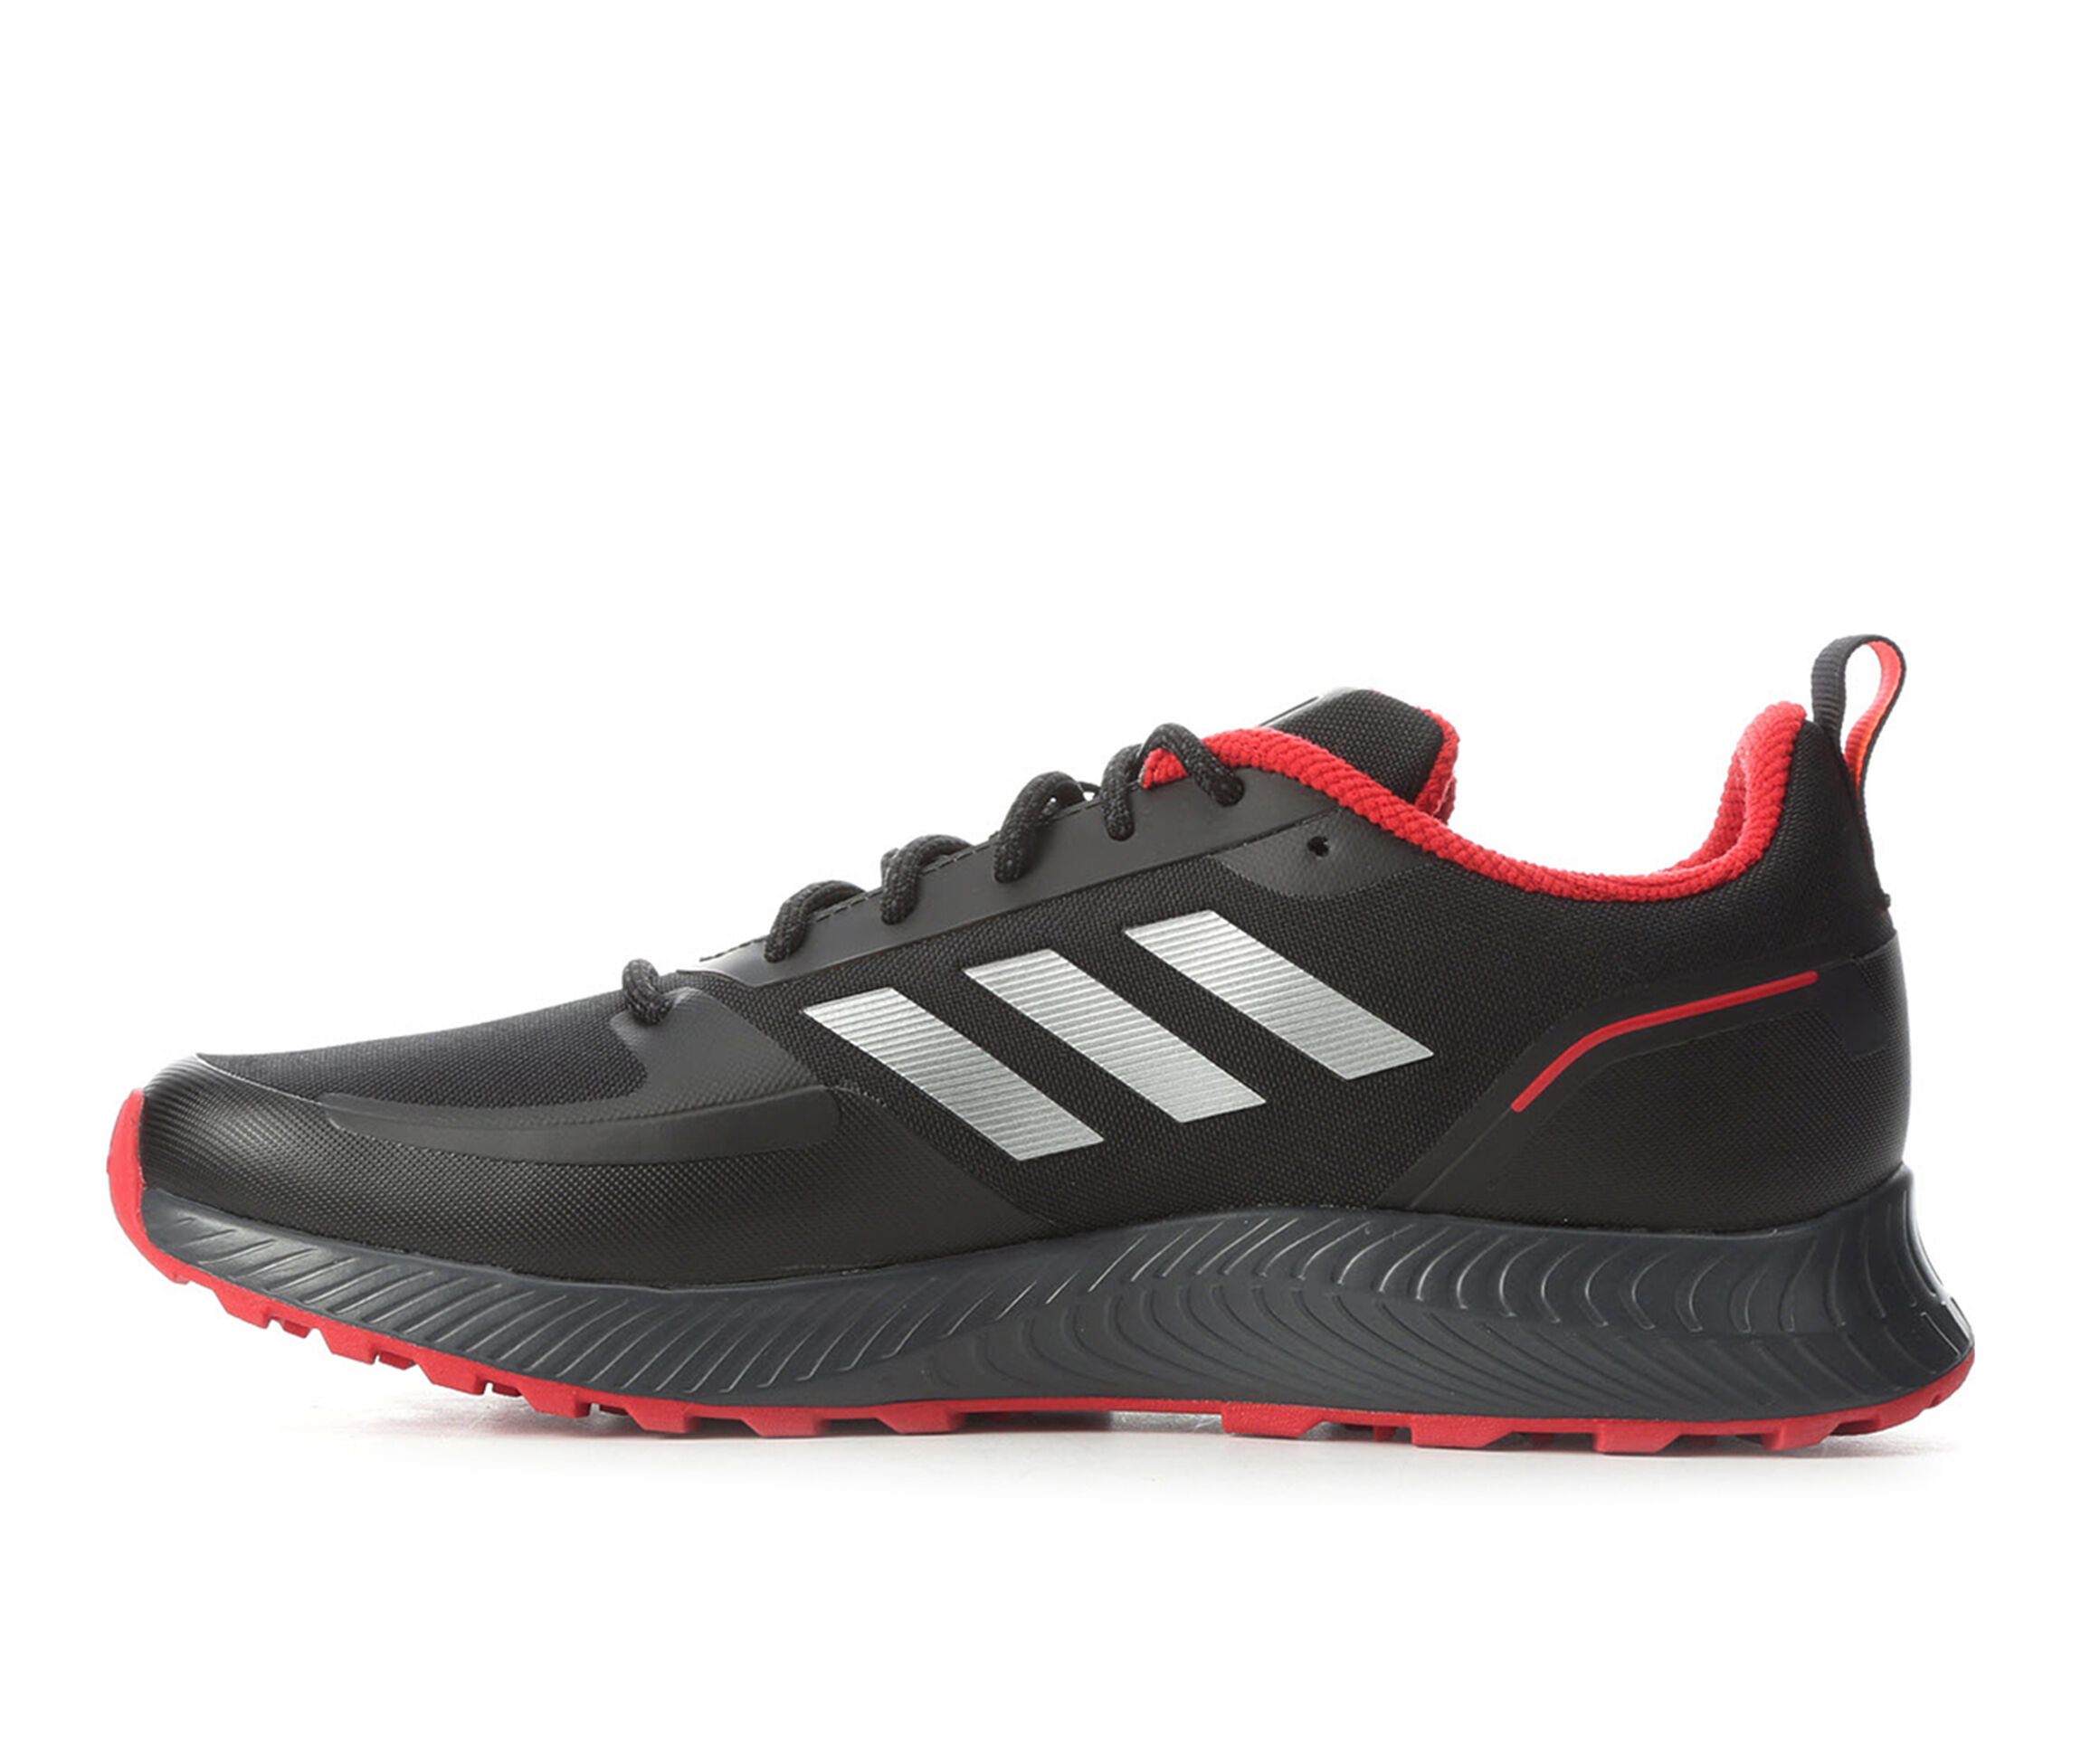 Adidas Shoes, Sneakers & Accessories | Shoe Carnival